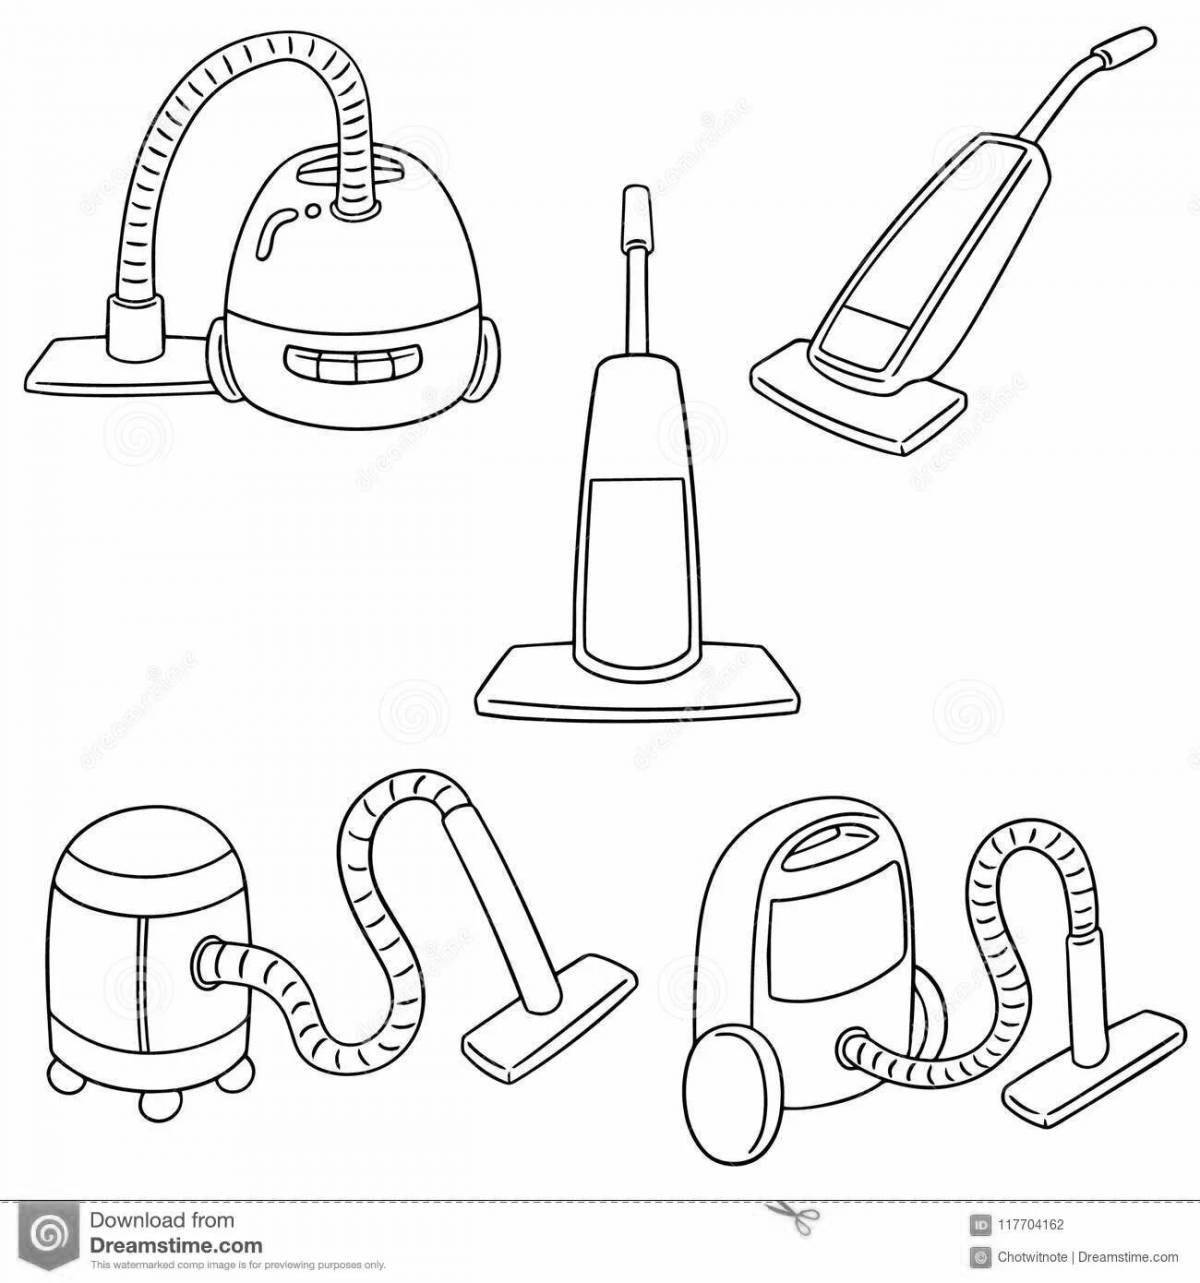 Colorful vacuum cleaner coloring page for 3-4 year olds